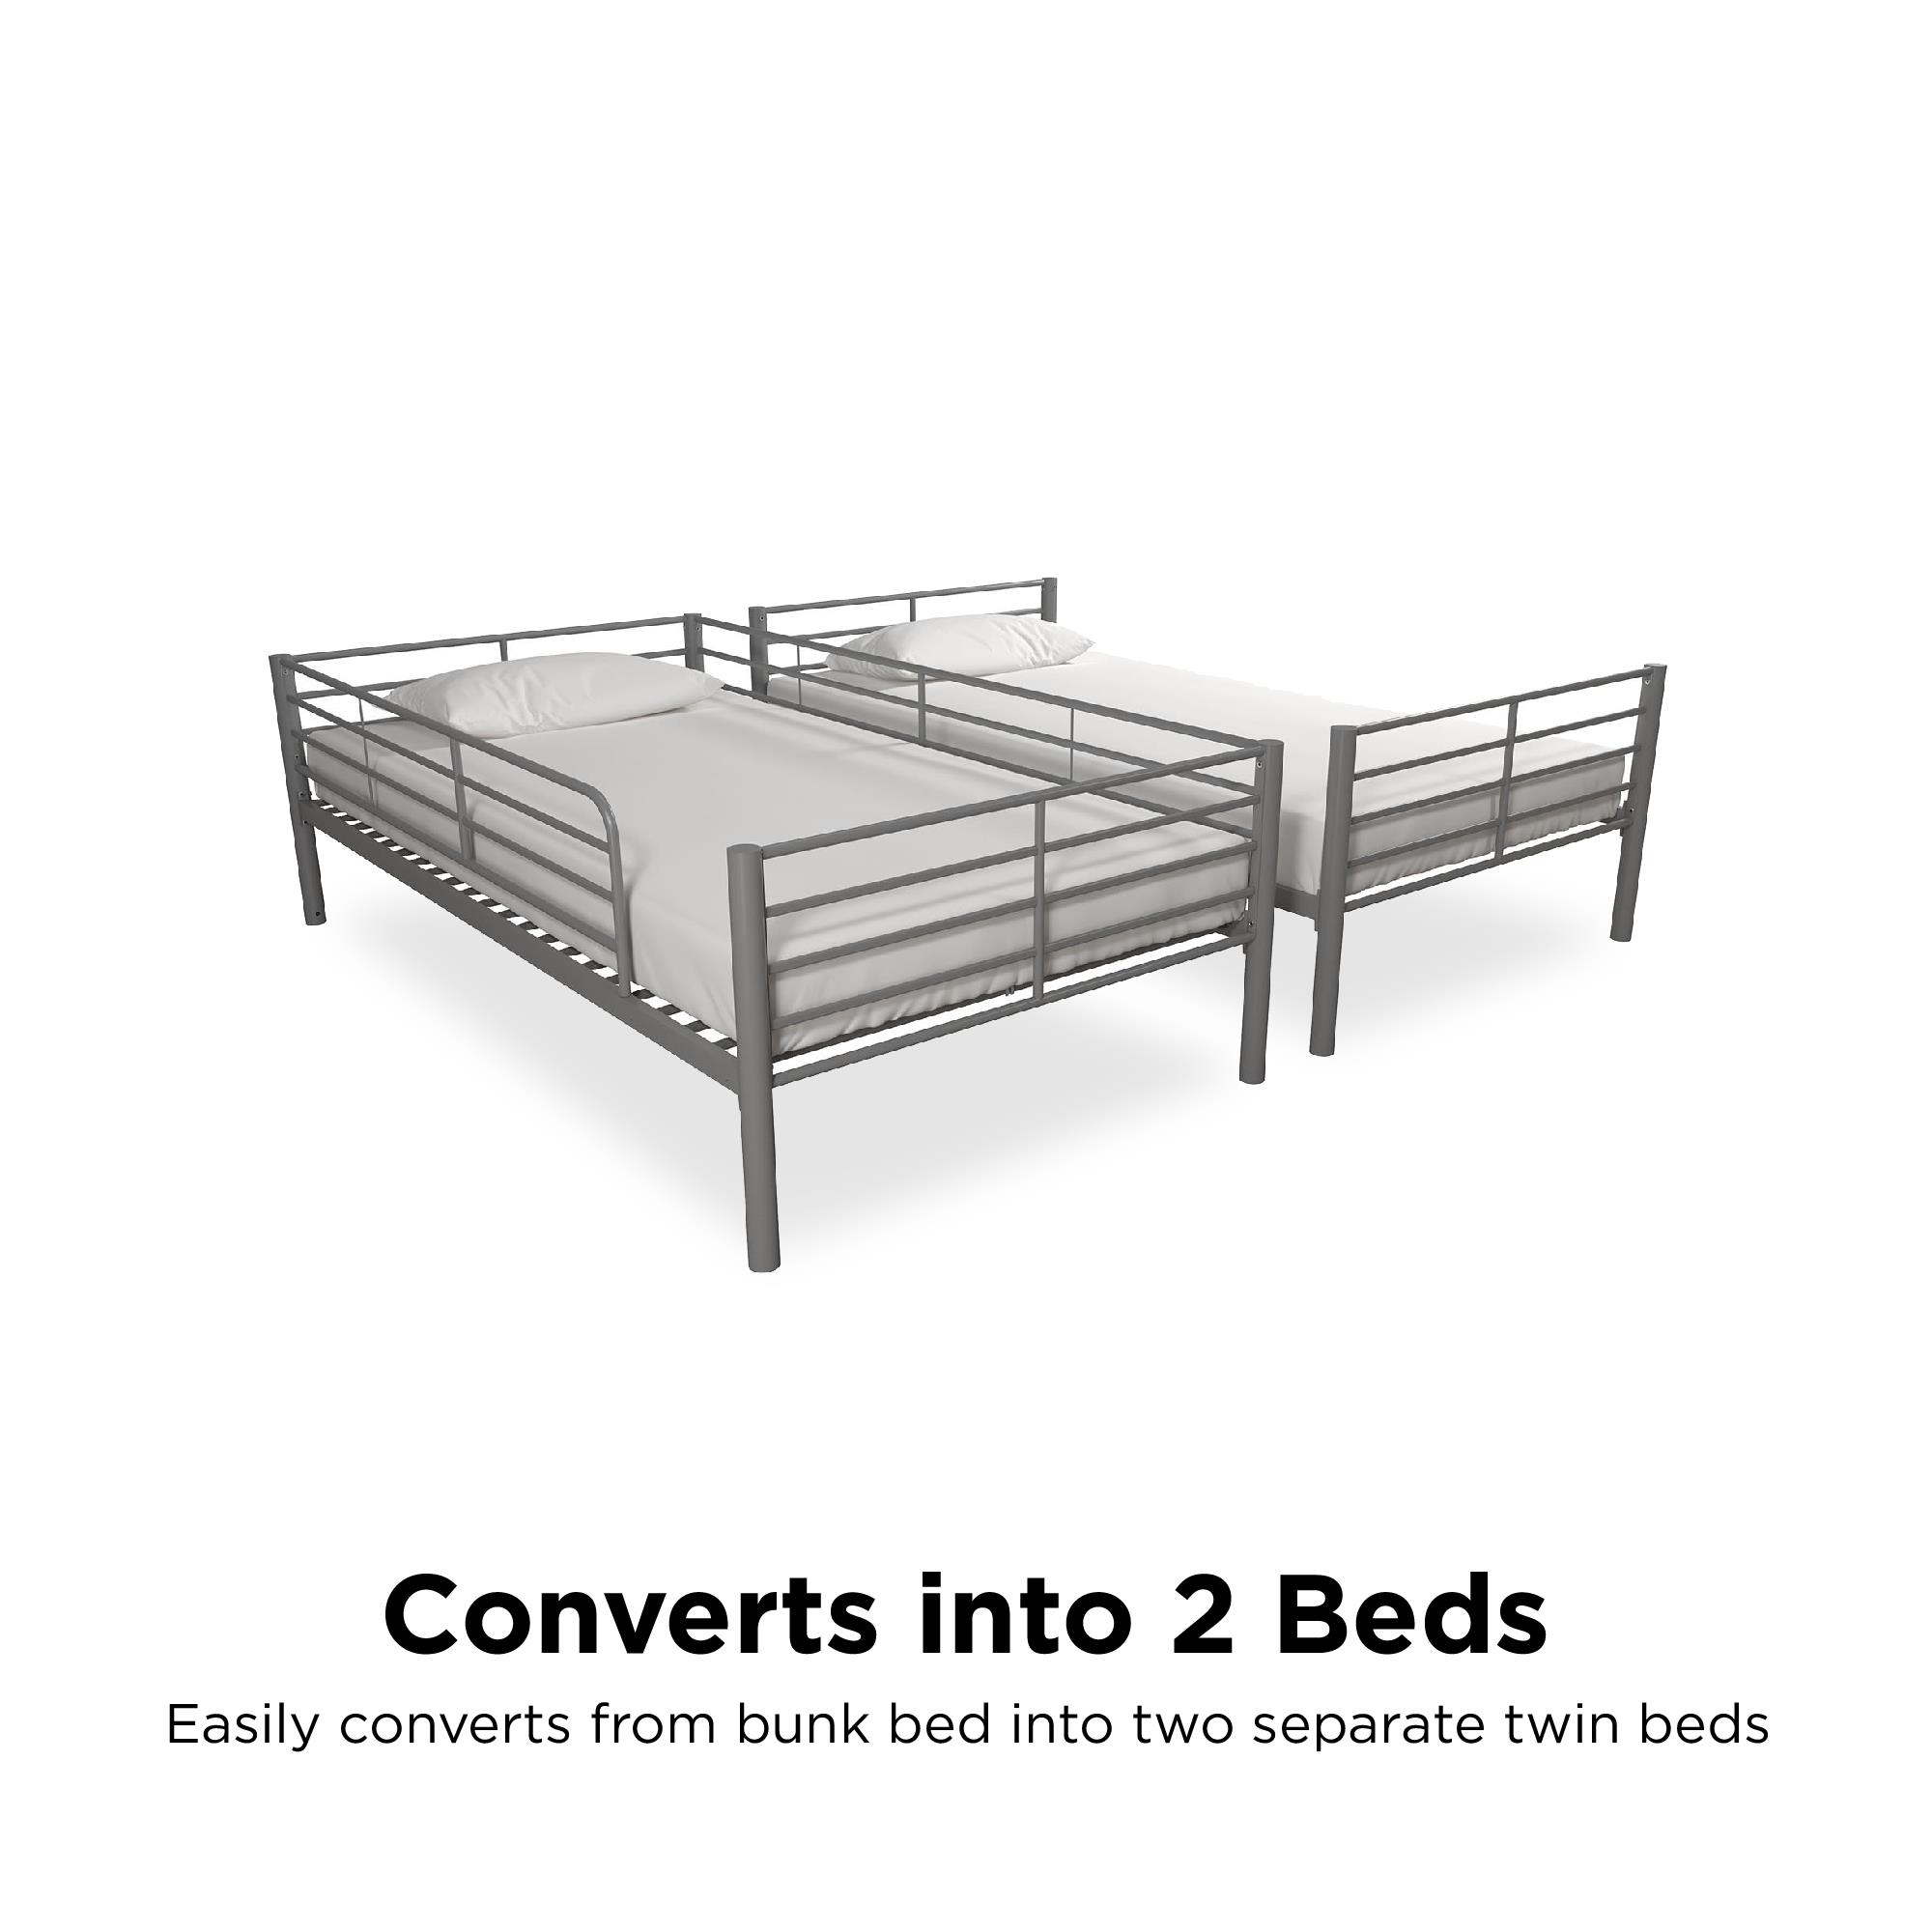 Mainstays Convertible Twin over Twin Metal Bunk Bed, Silver - image 5 of 26